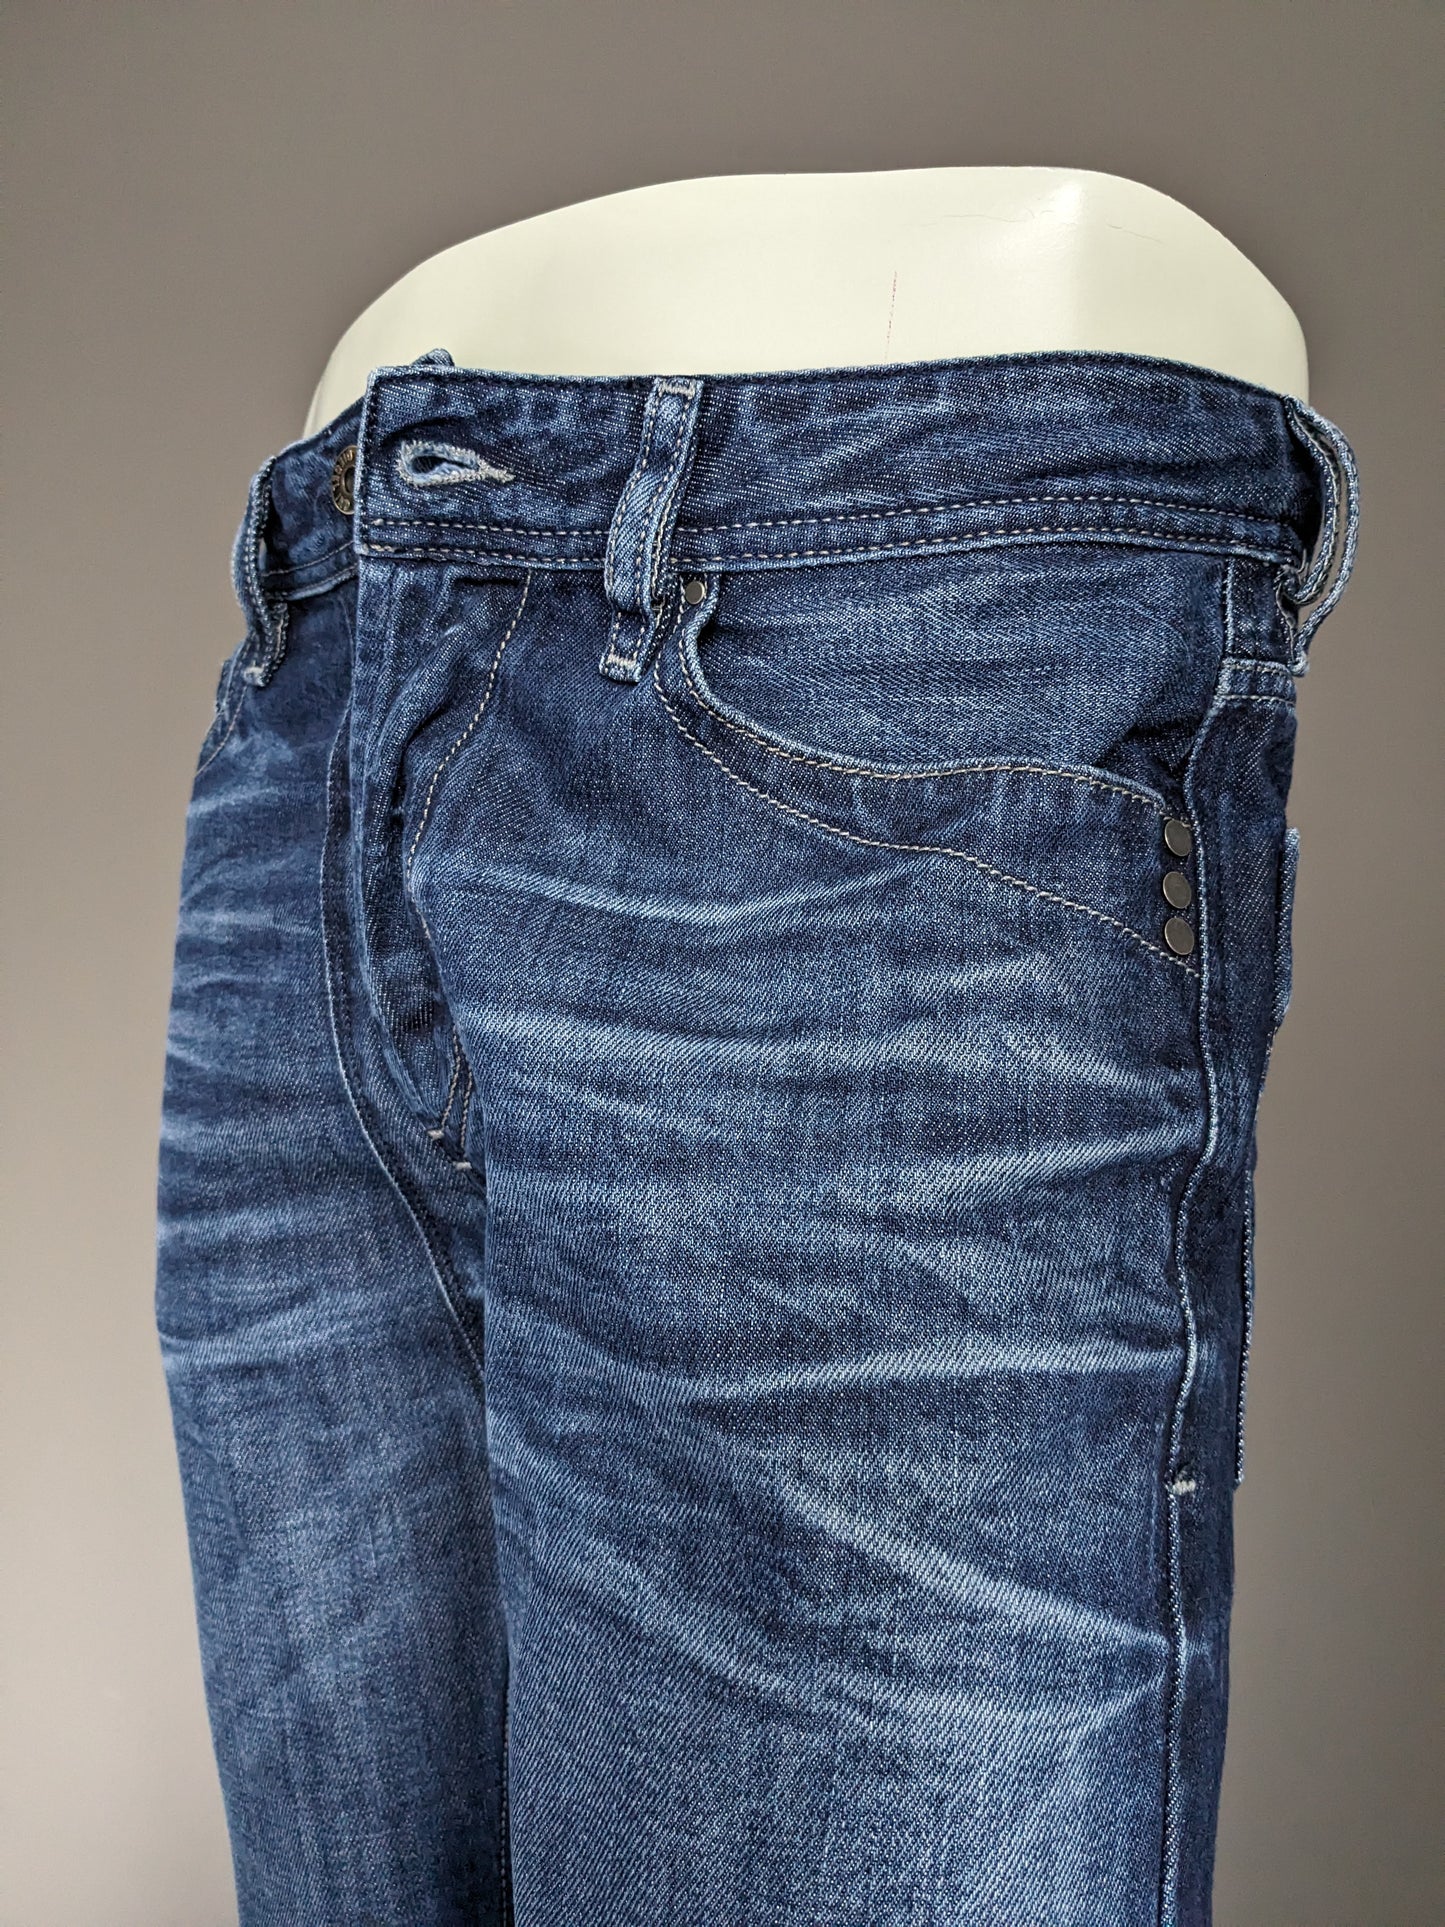 Jeans diesel. Color azul oscuro. Tamaño W31 - L32. Tipo "Mennit".